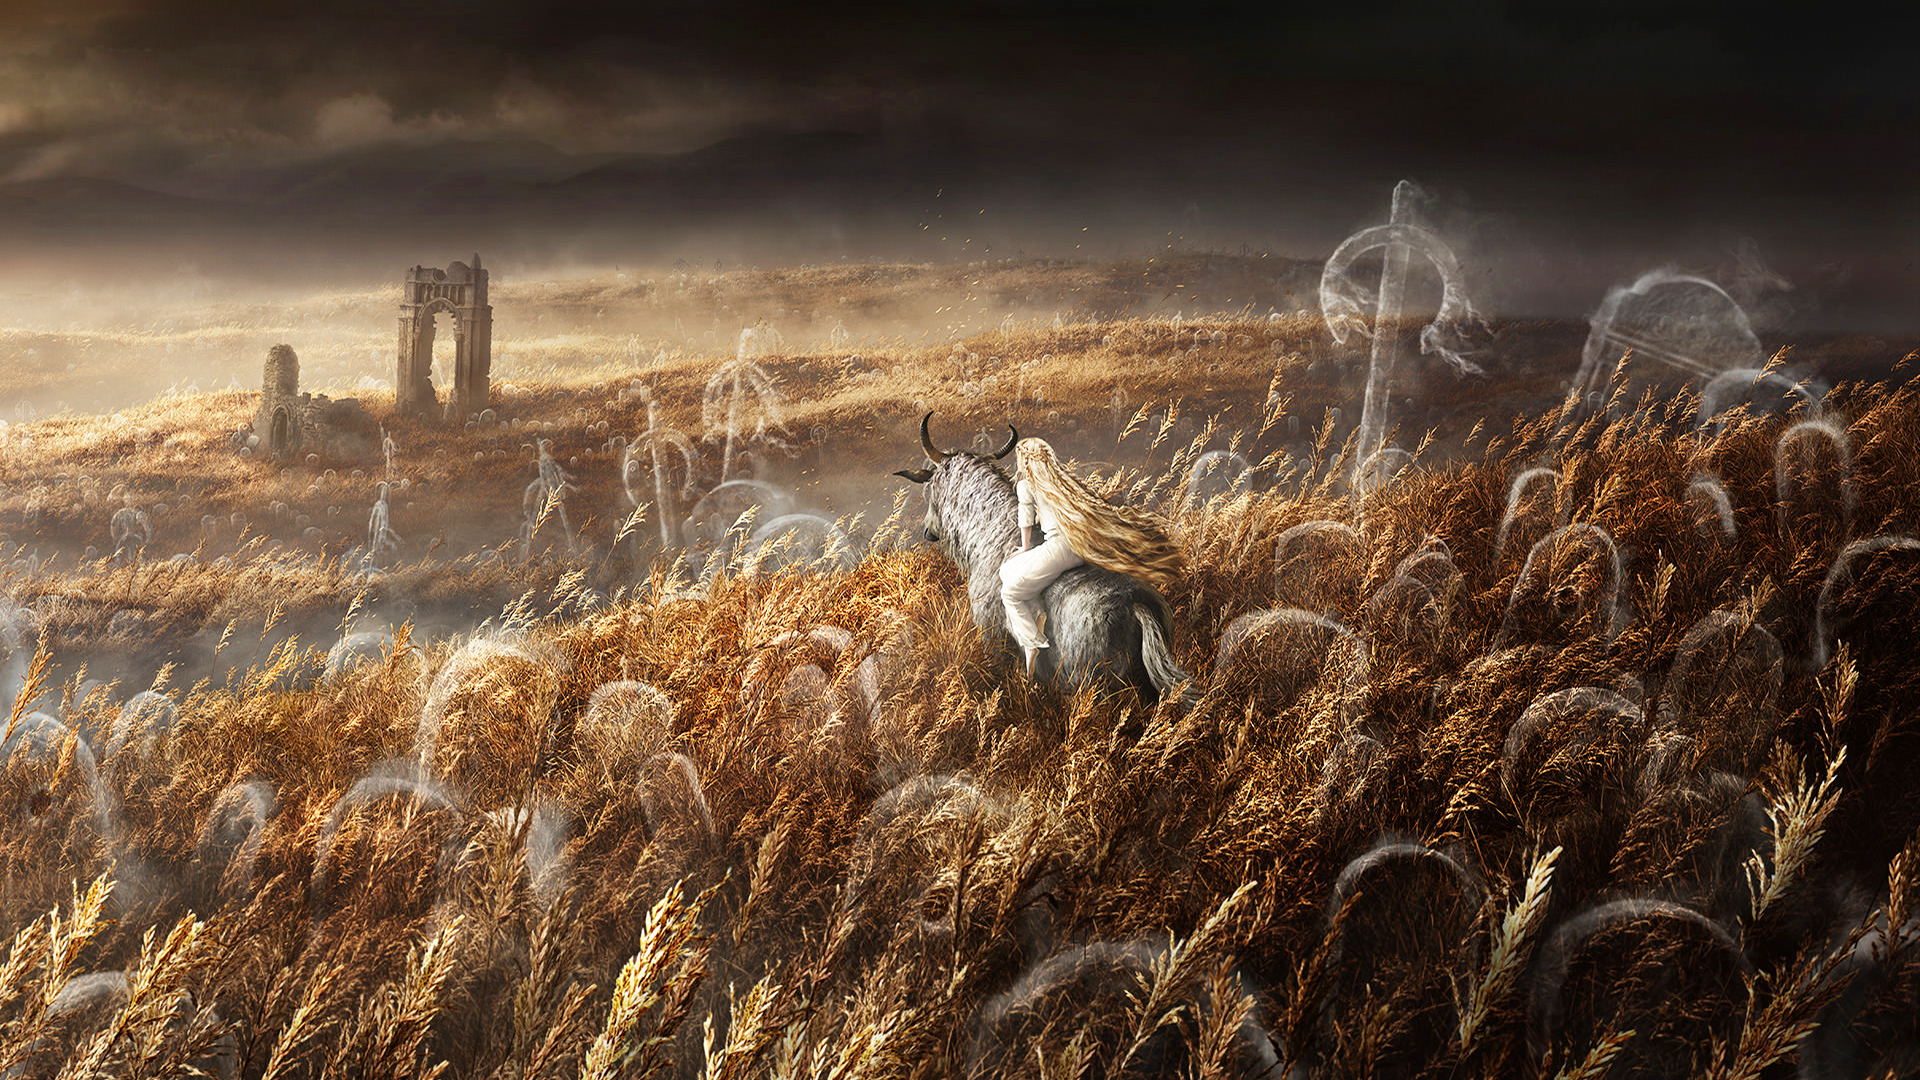 Elden Ring Shadow of the Erdtree DLC artwork with a character on a horse in a golden field